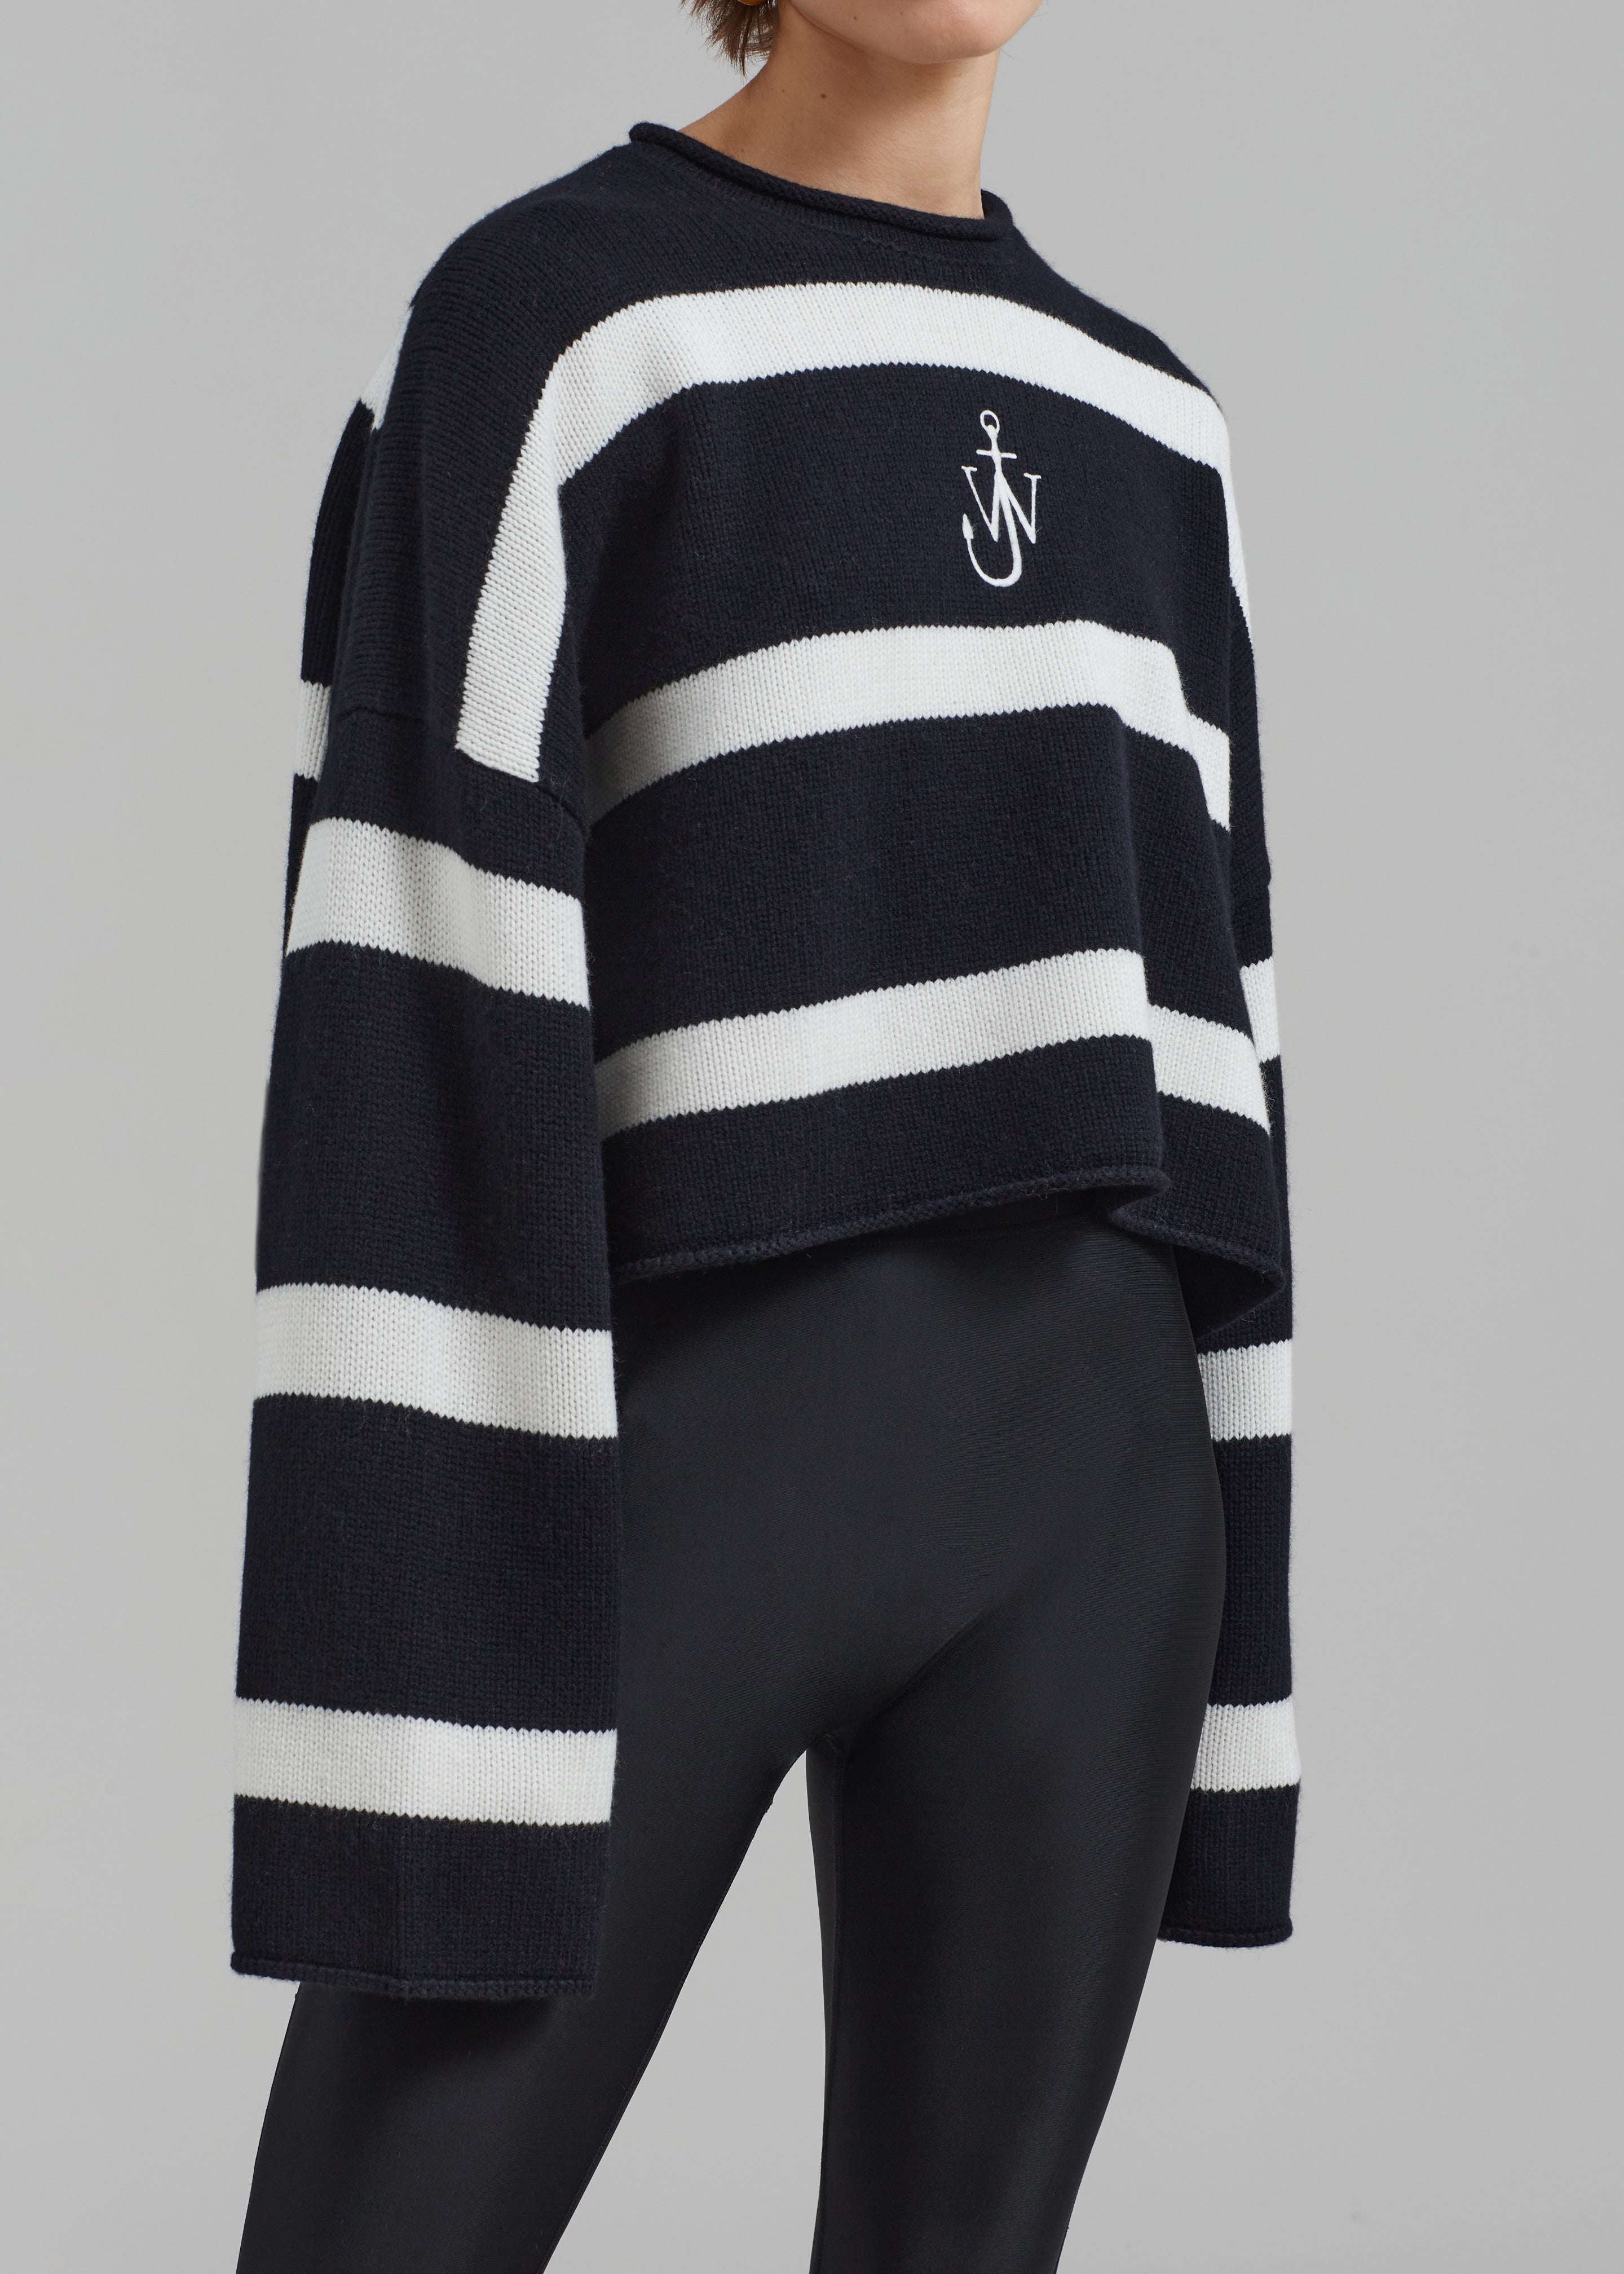 JW Anderson Cropped Anchor Jumper - Black/White - 3